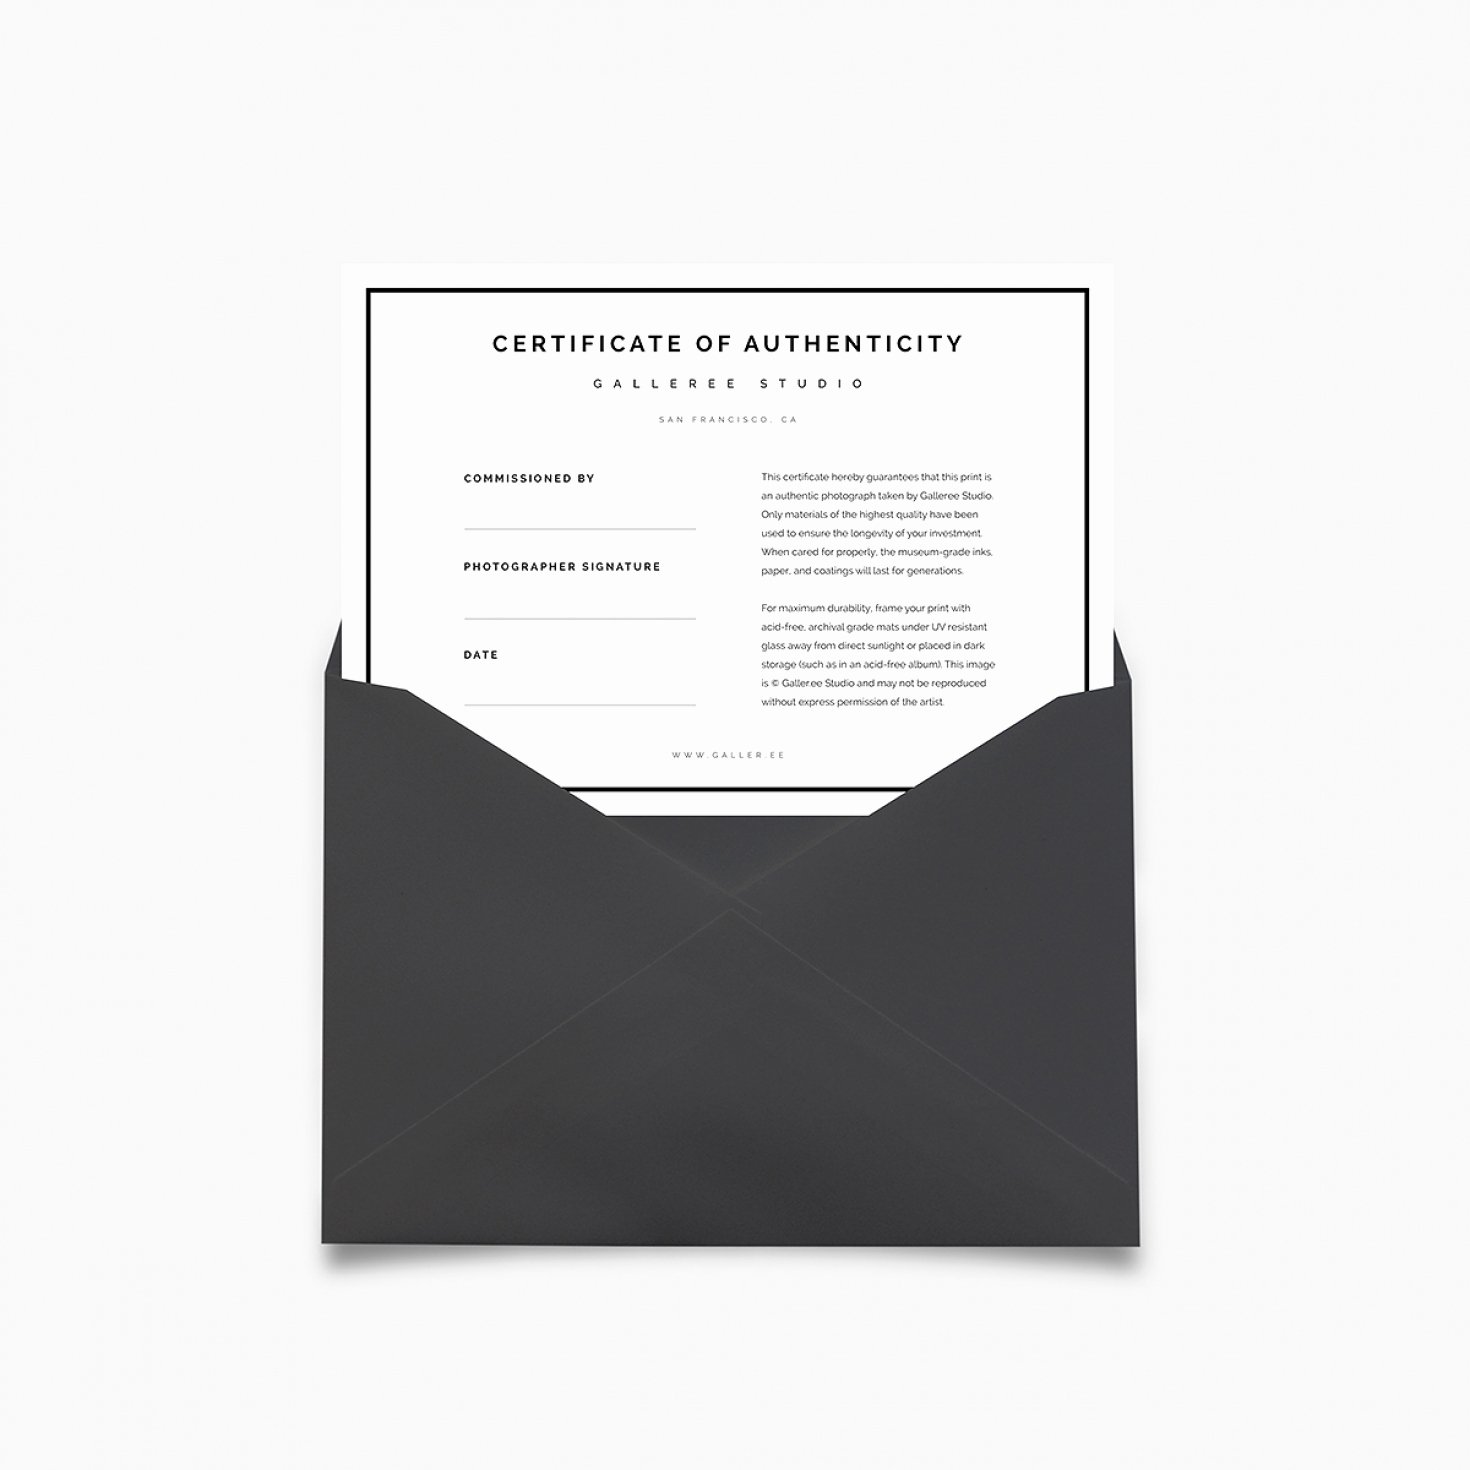 Certificate Of Authenticity Photography Template Awesome Certificates Authenticity